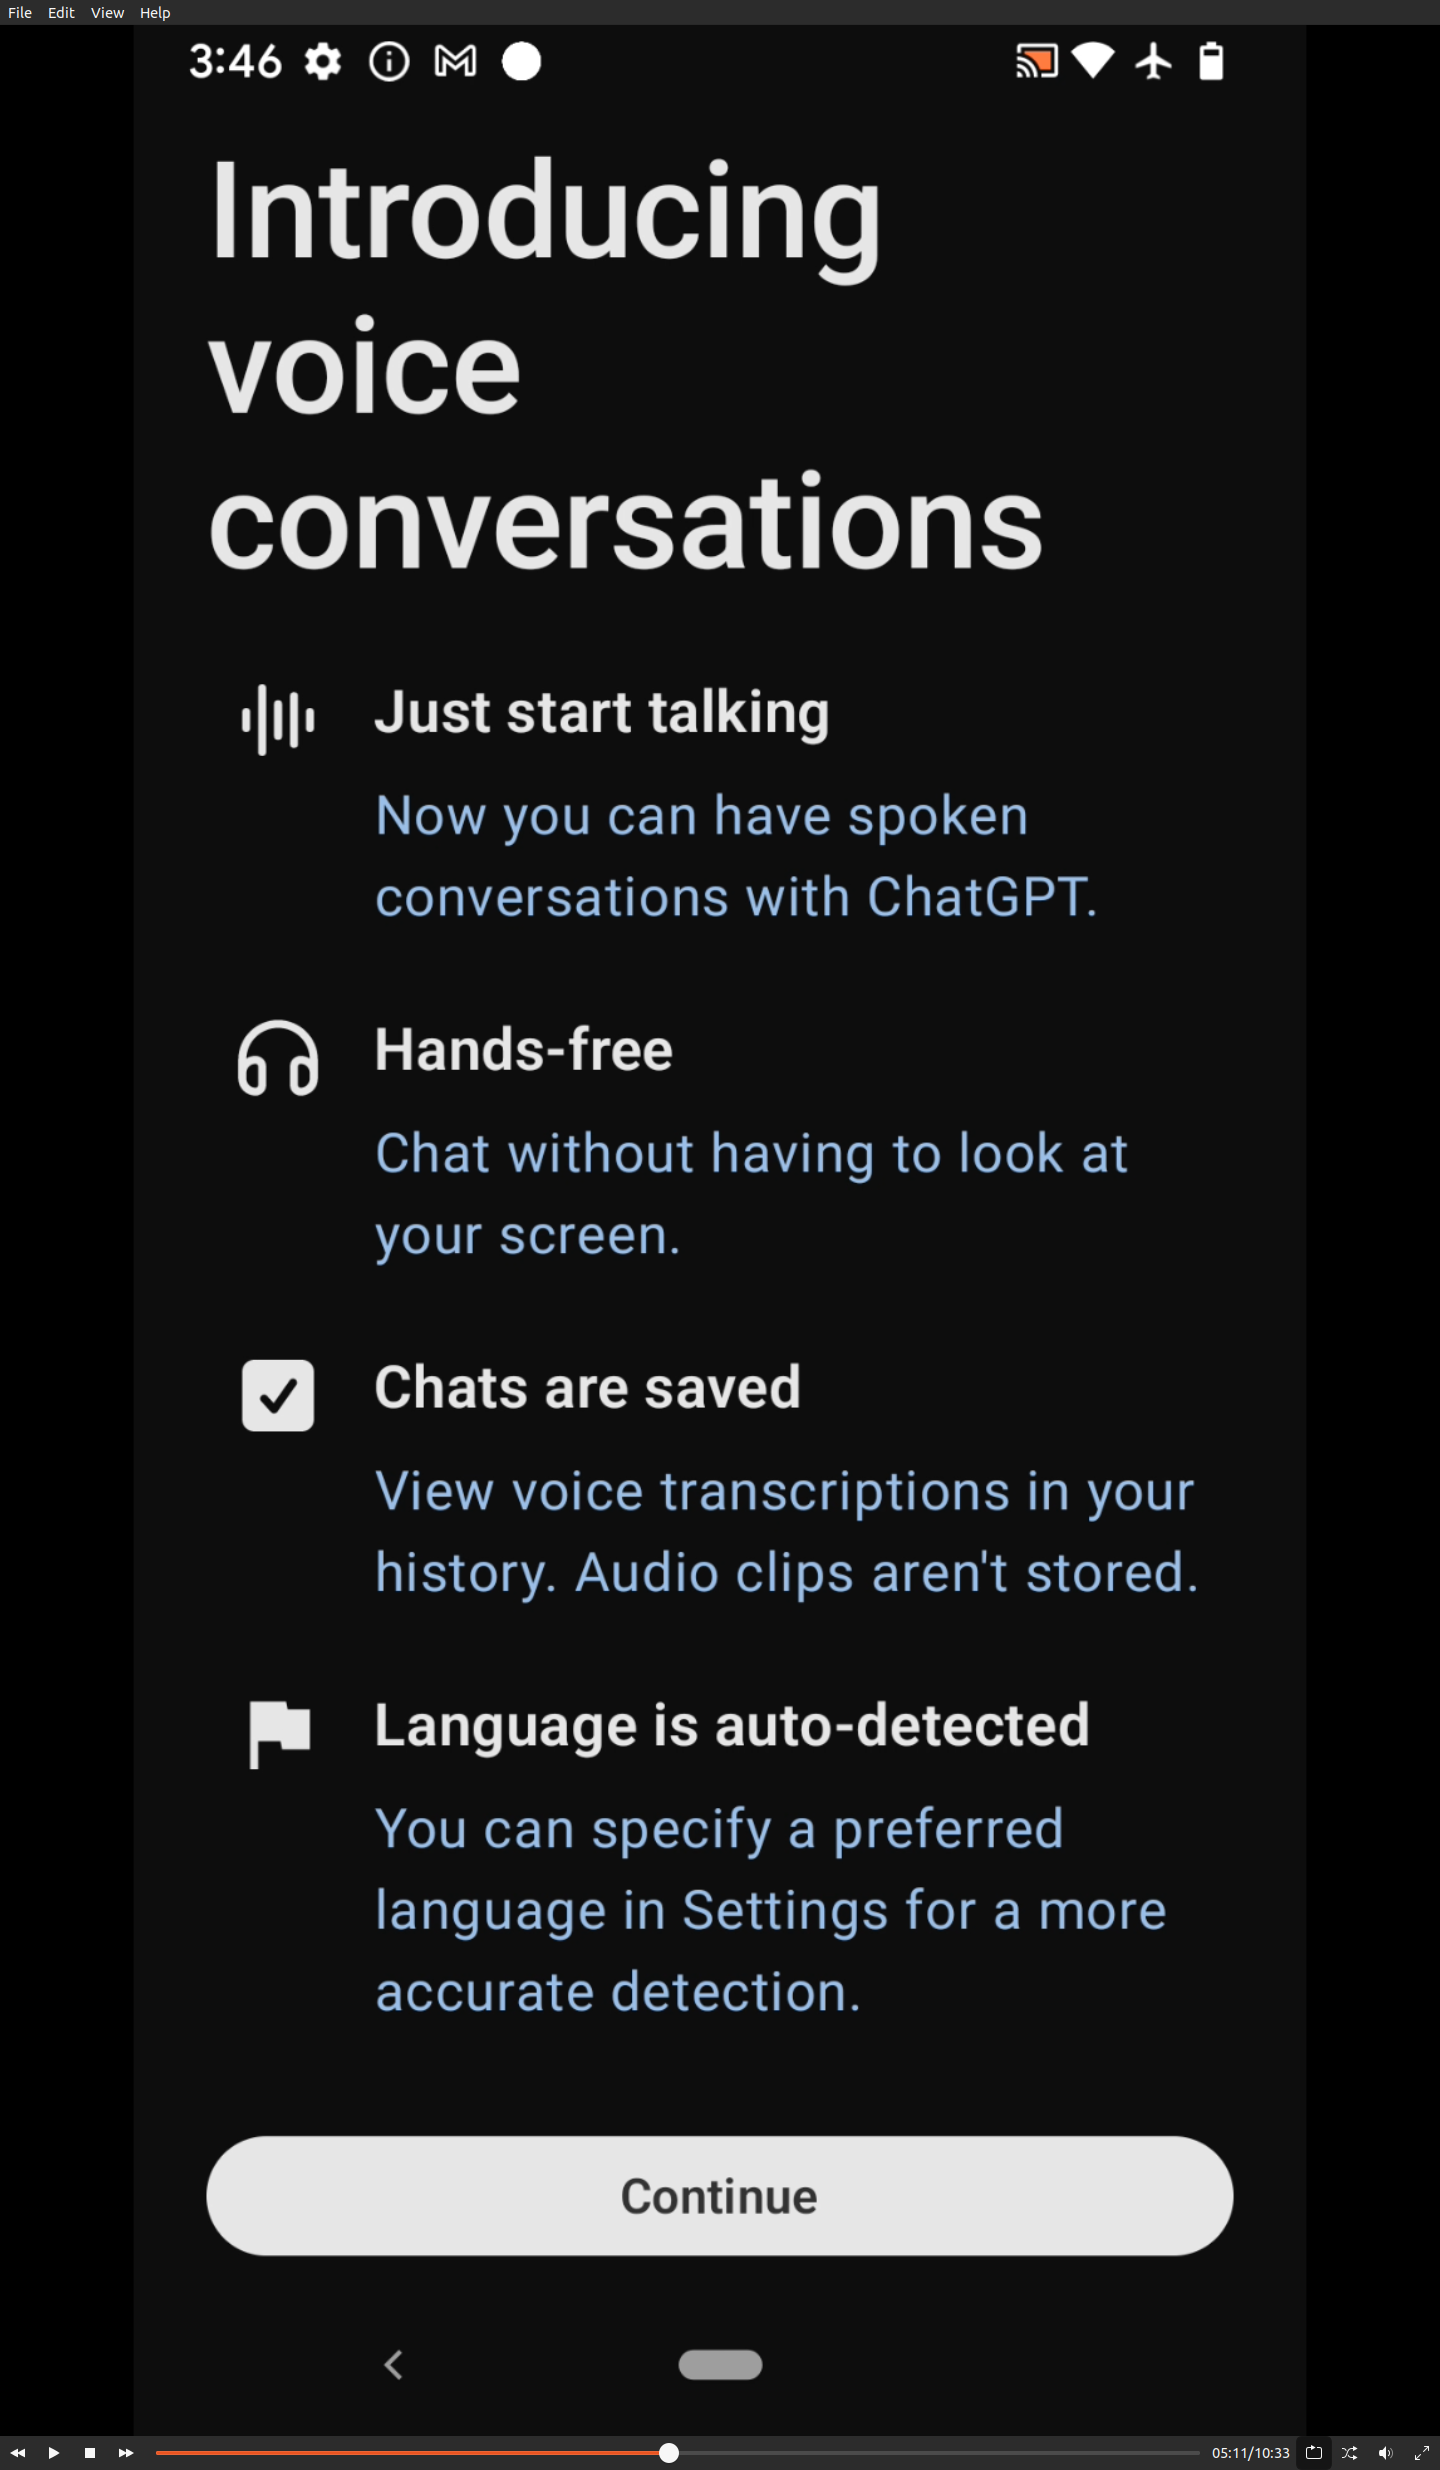 Voice conversations introduction page in ChatGPT